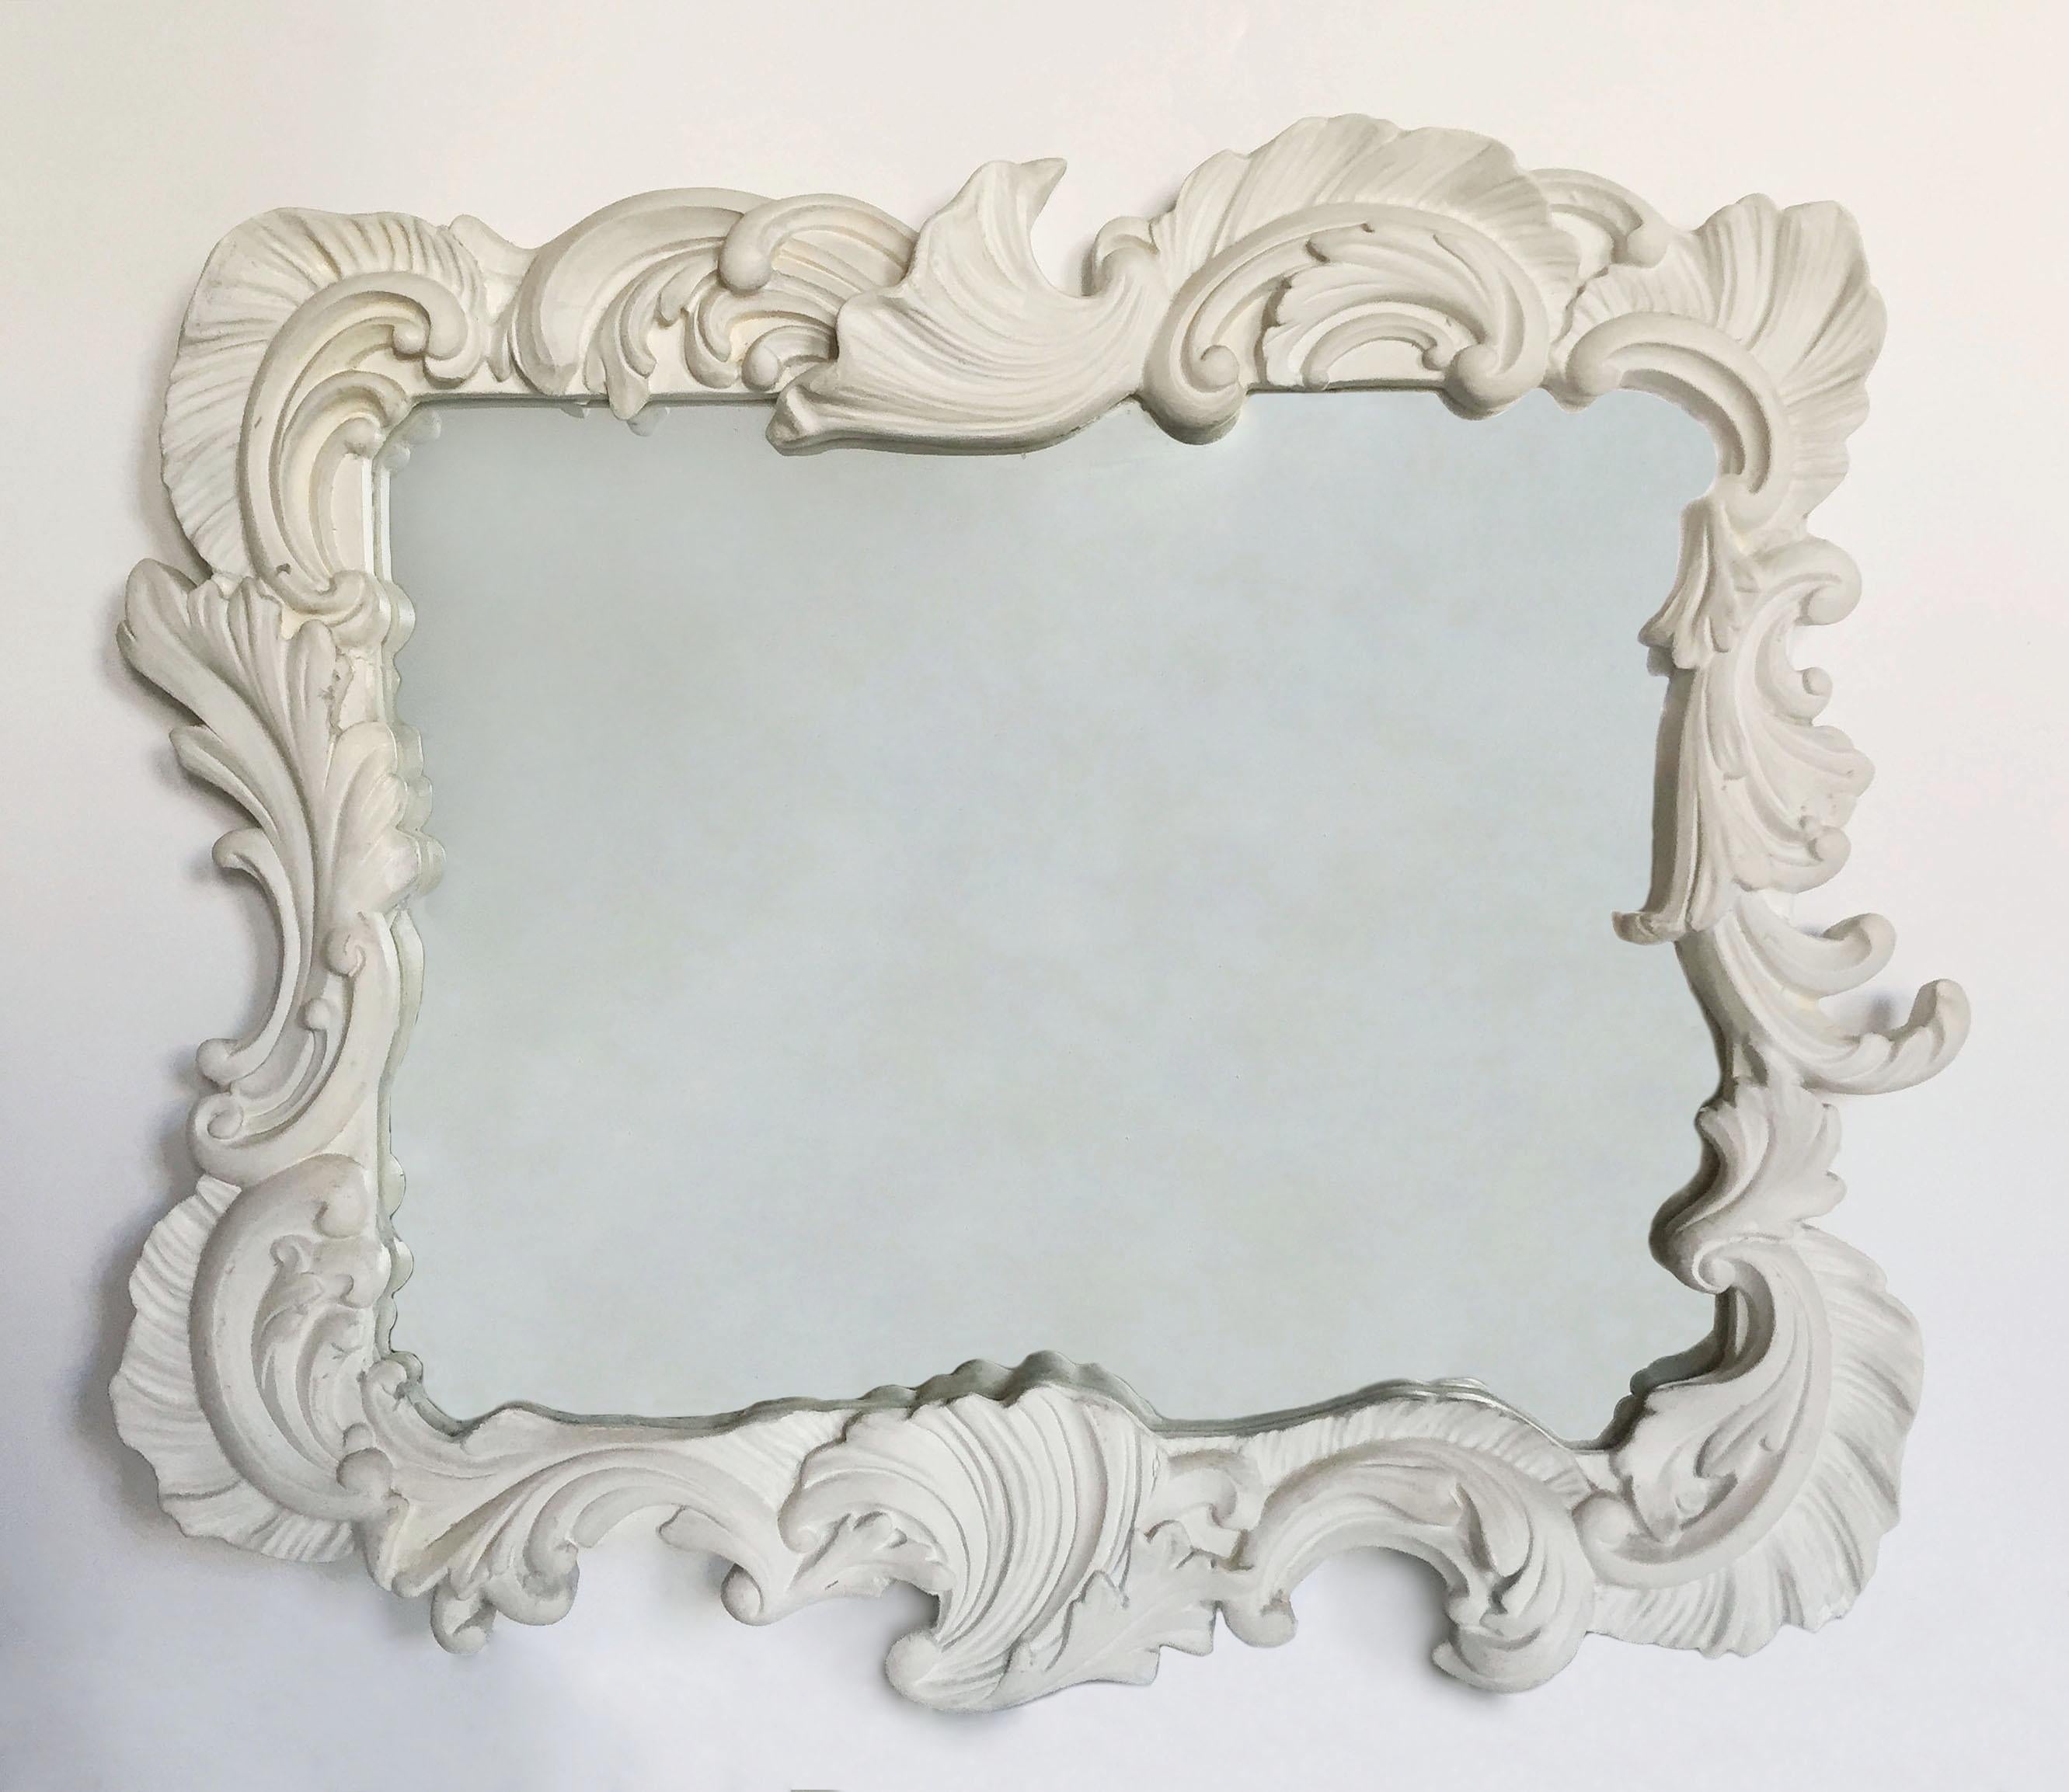 Dated 1951 on the mirror on the reverse. A period exuberant large plaster form. Style of Serge Roche and Dorothy Draper. Designer is unknown. 